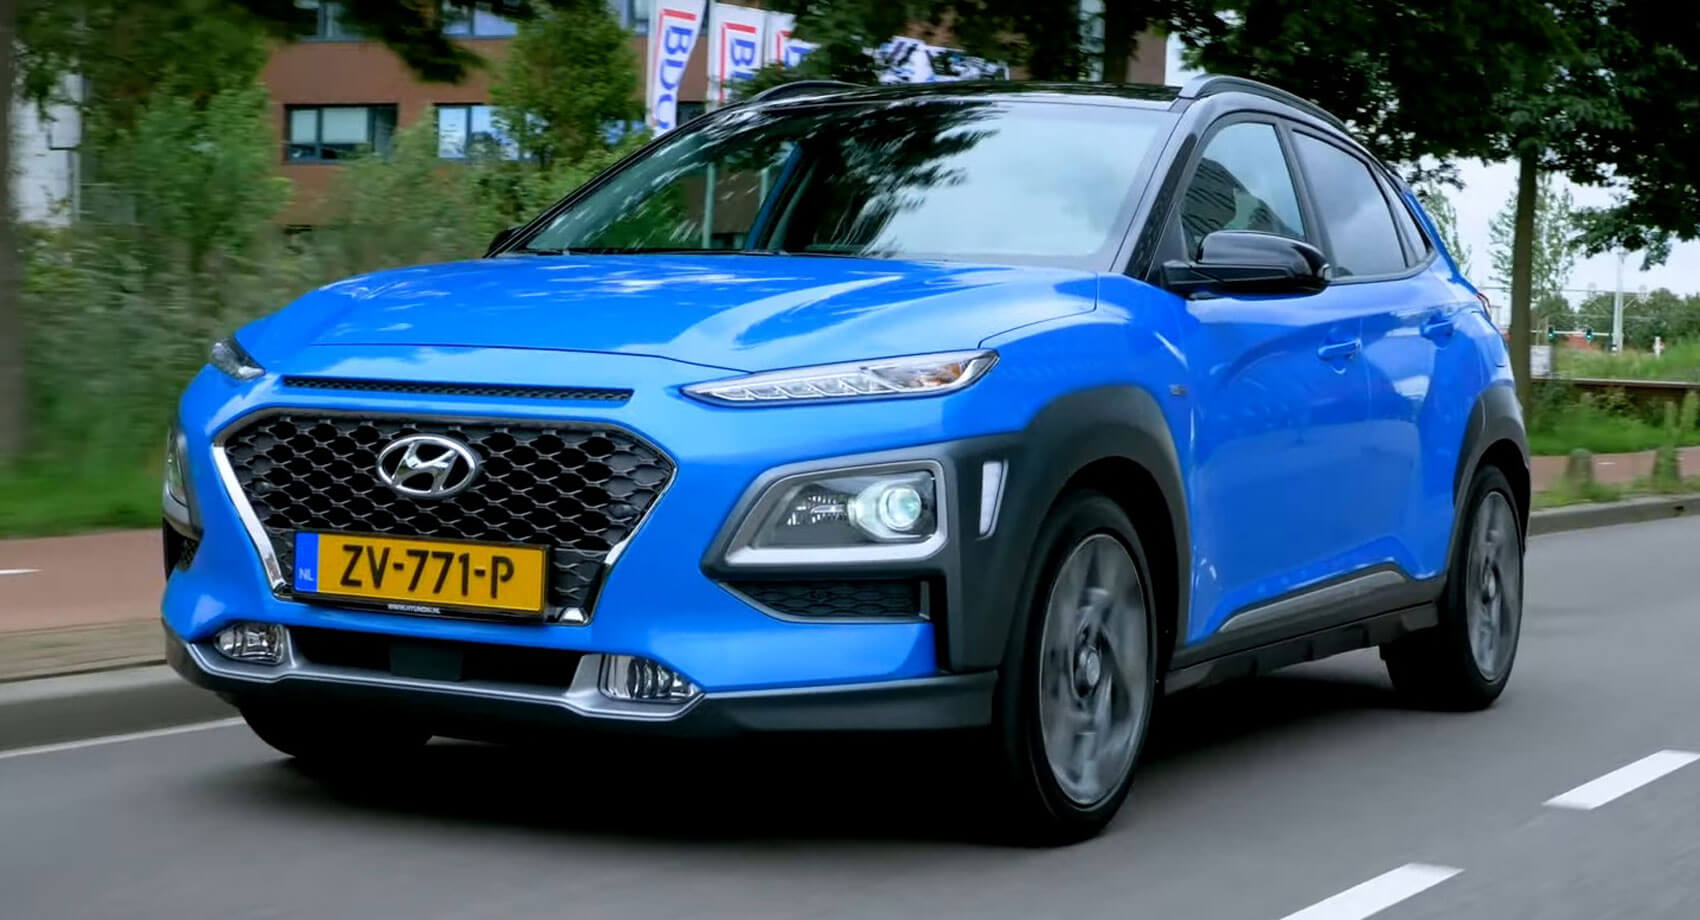 Hyundai Kona Hybrid Is A FunkyLooking Small SUV With An Electric Touch